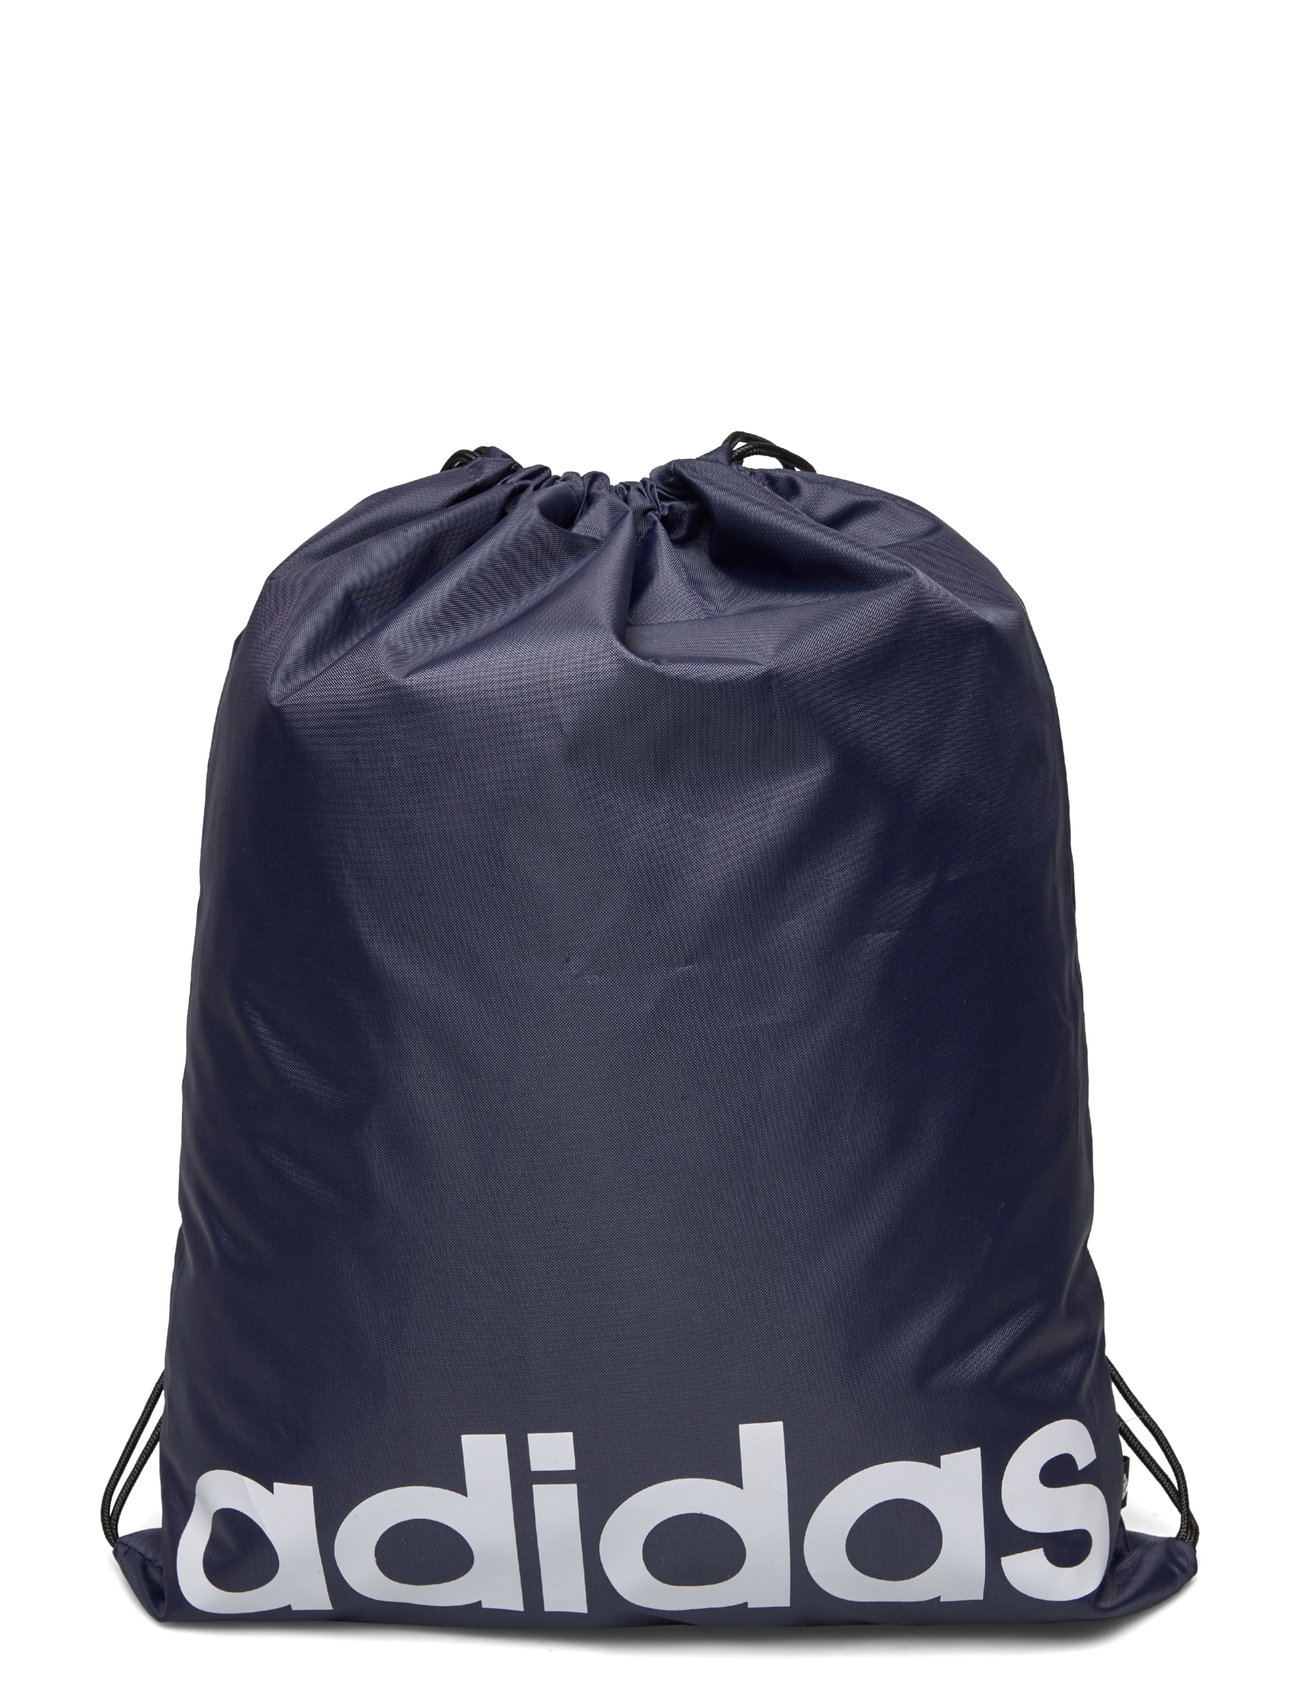 This Adidas Gym Bag Is So Cute You'll Want to Carry It Everywhere | Us  Weekly